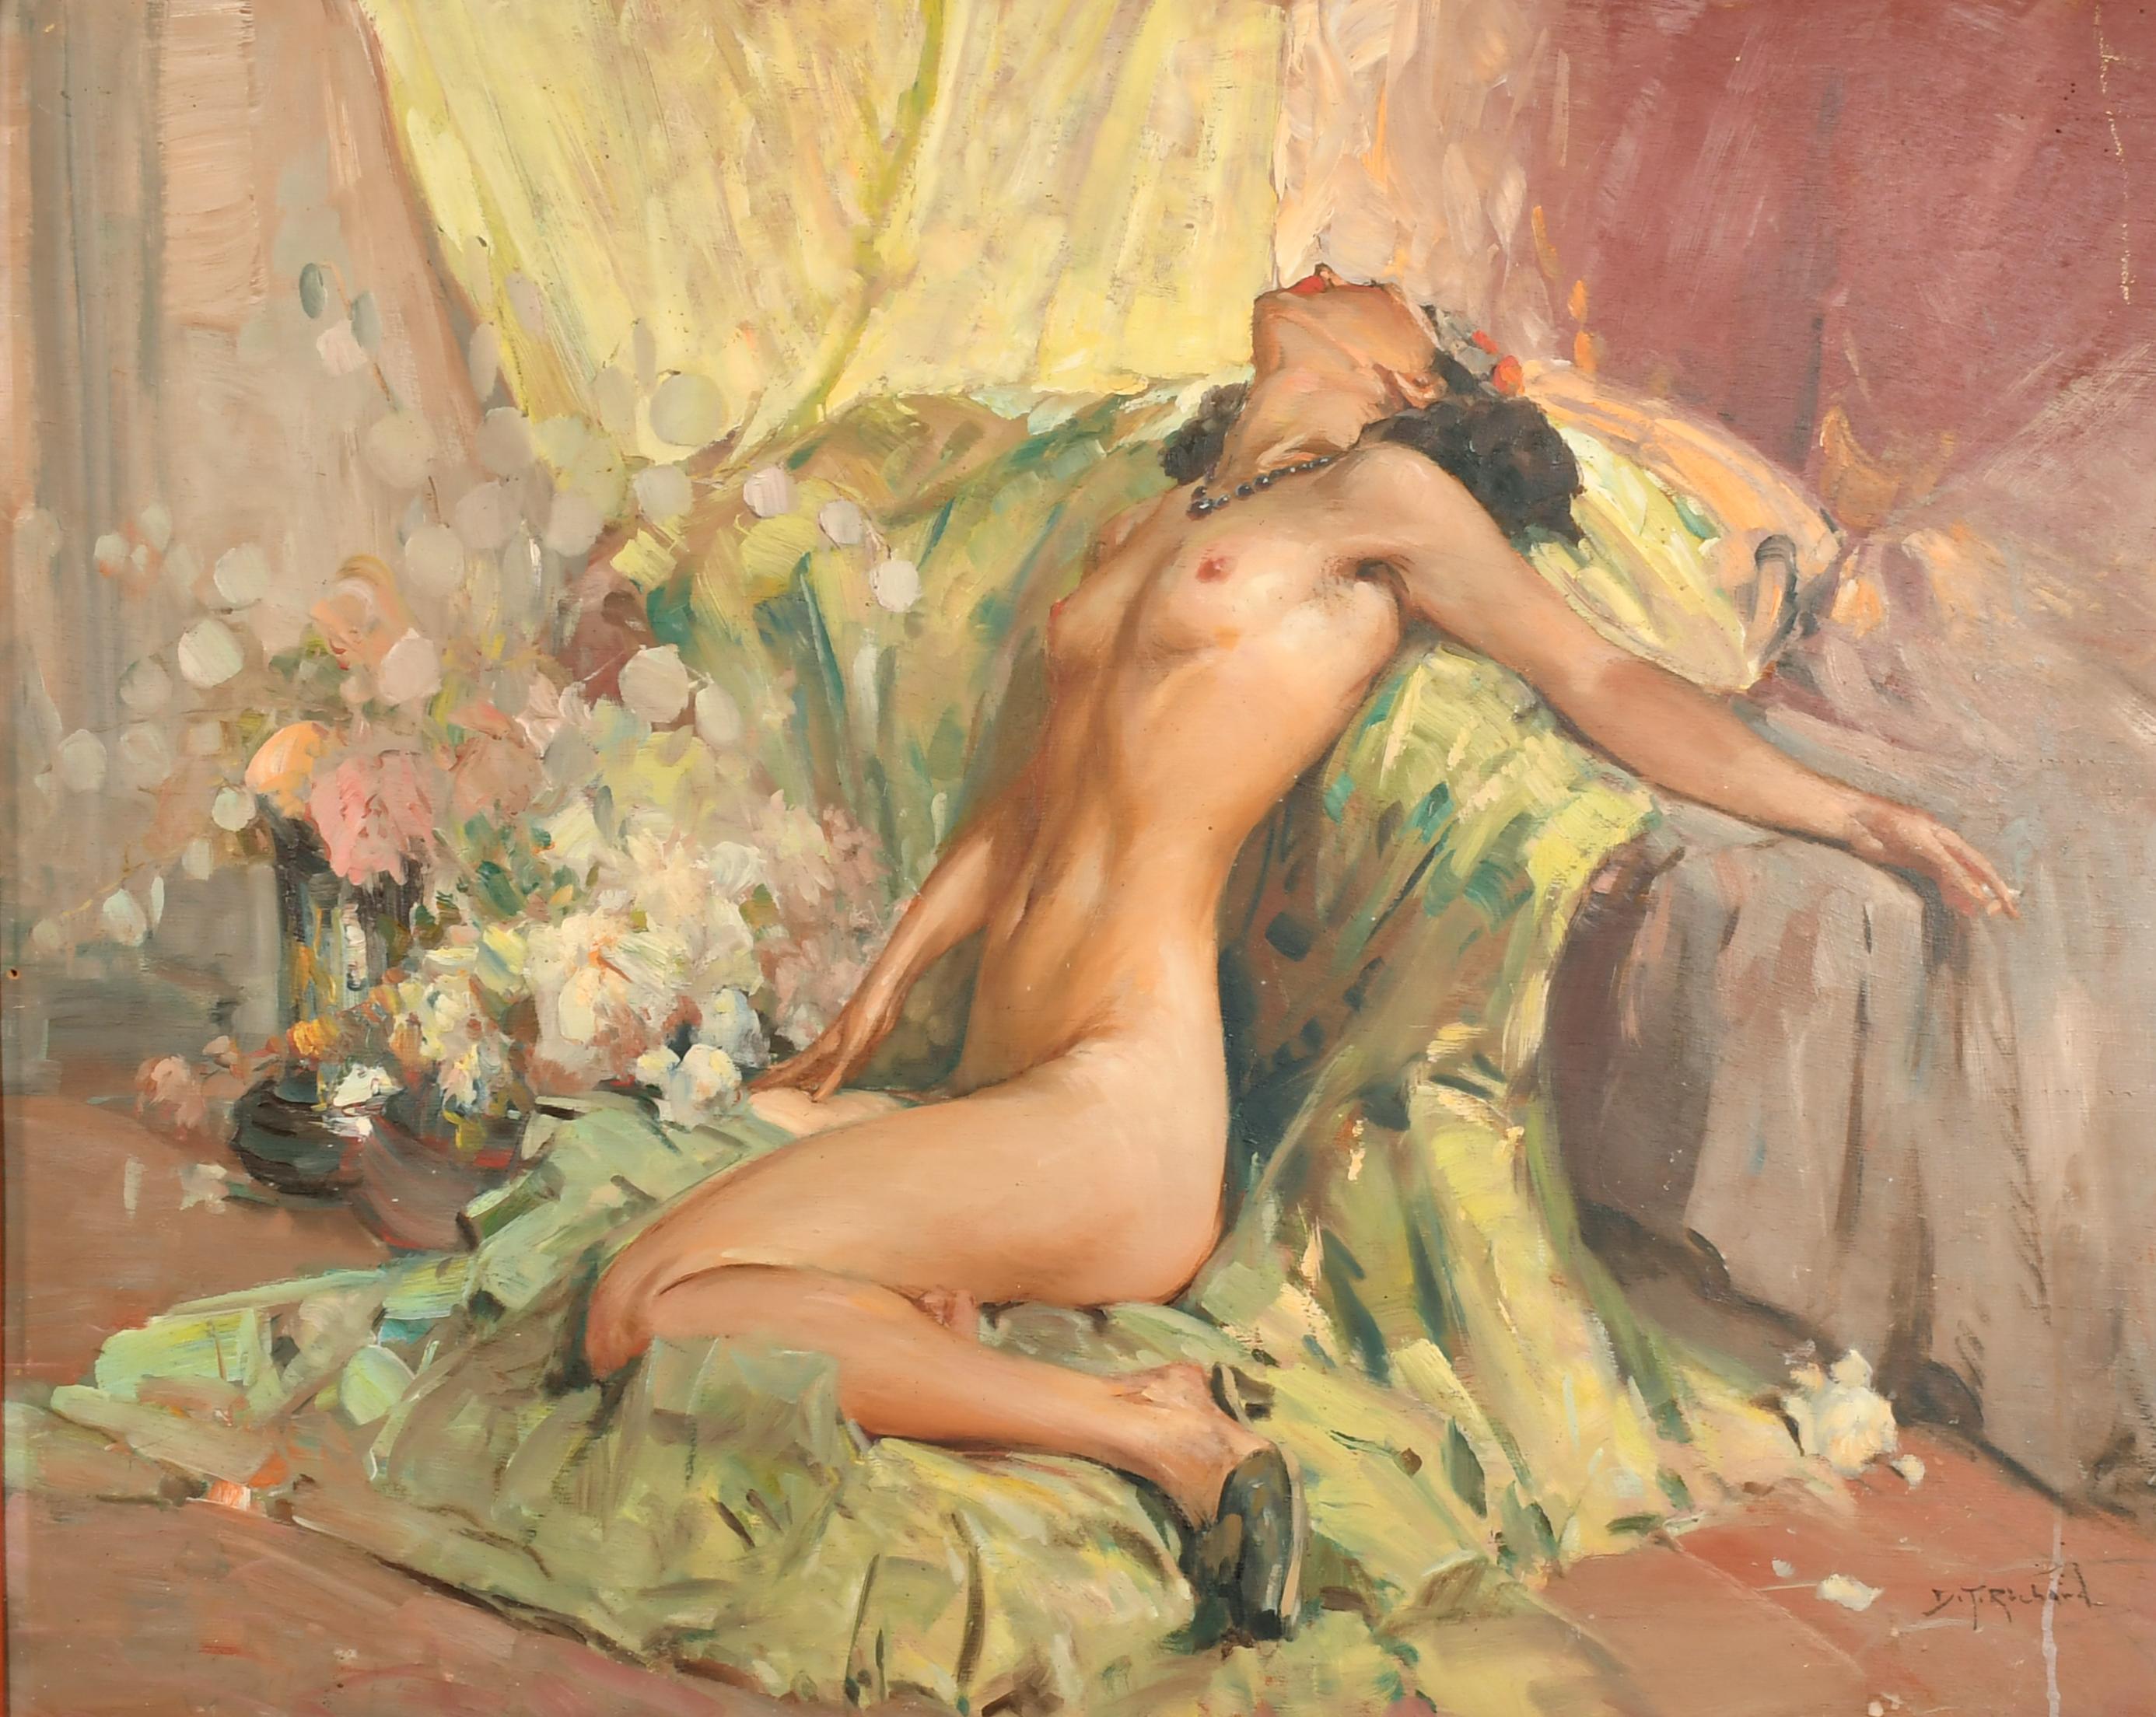 Richard Durand Togo (Argentinian born 1910) Animal Painting - Large Mid Century Signed Oil Reclining Nude Model Sumptuous Interior